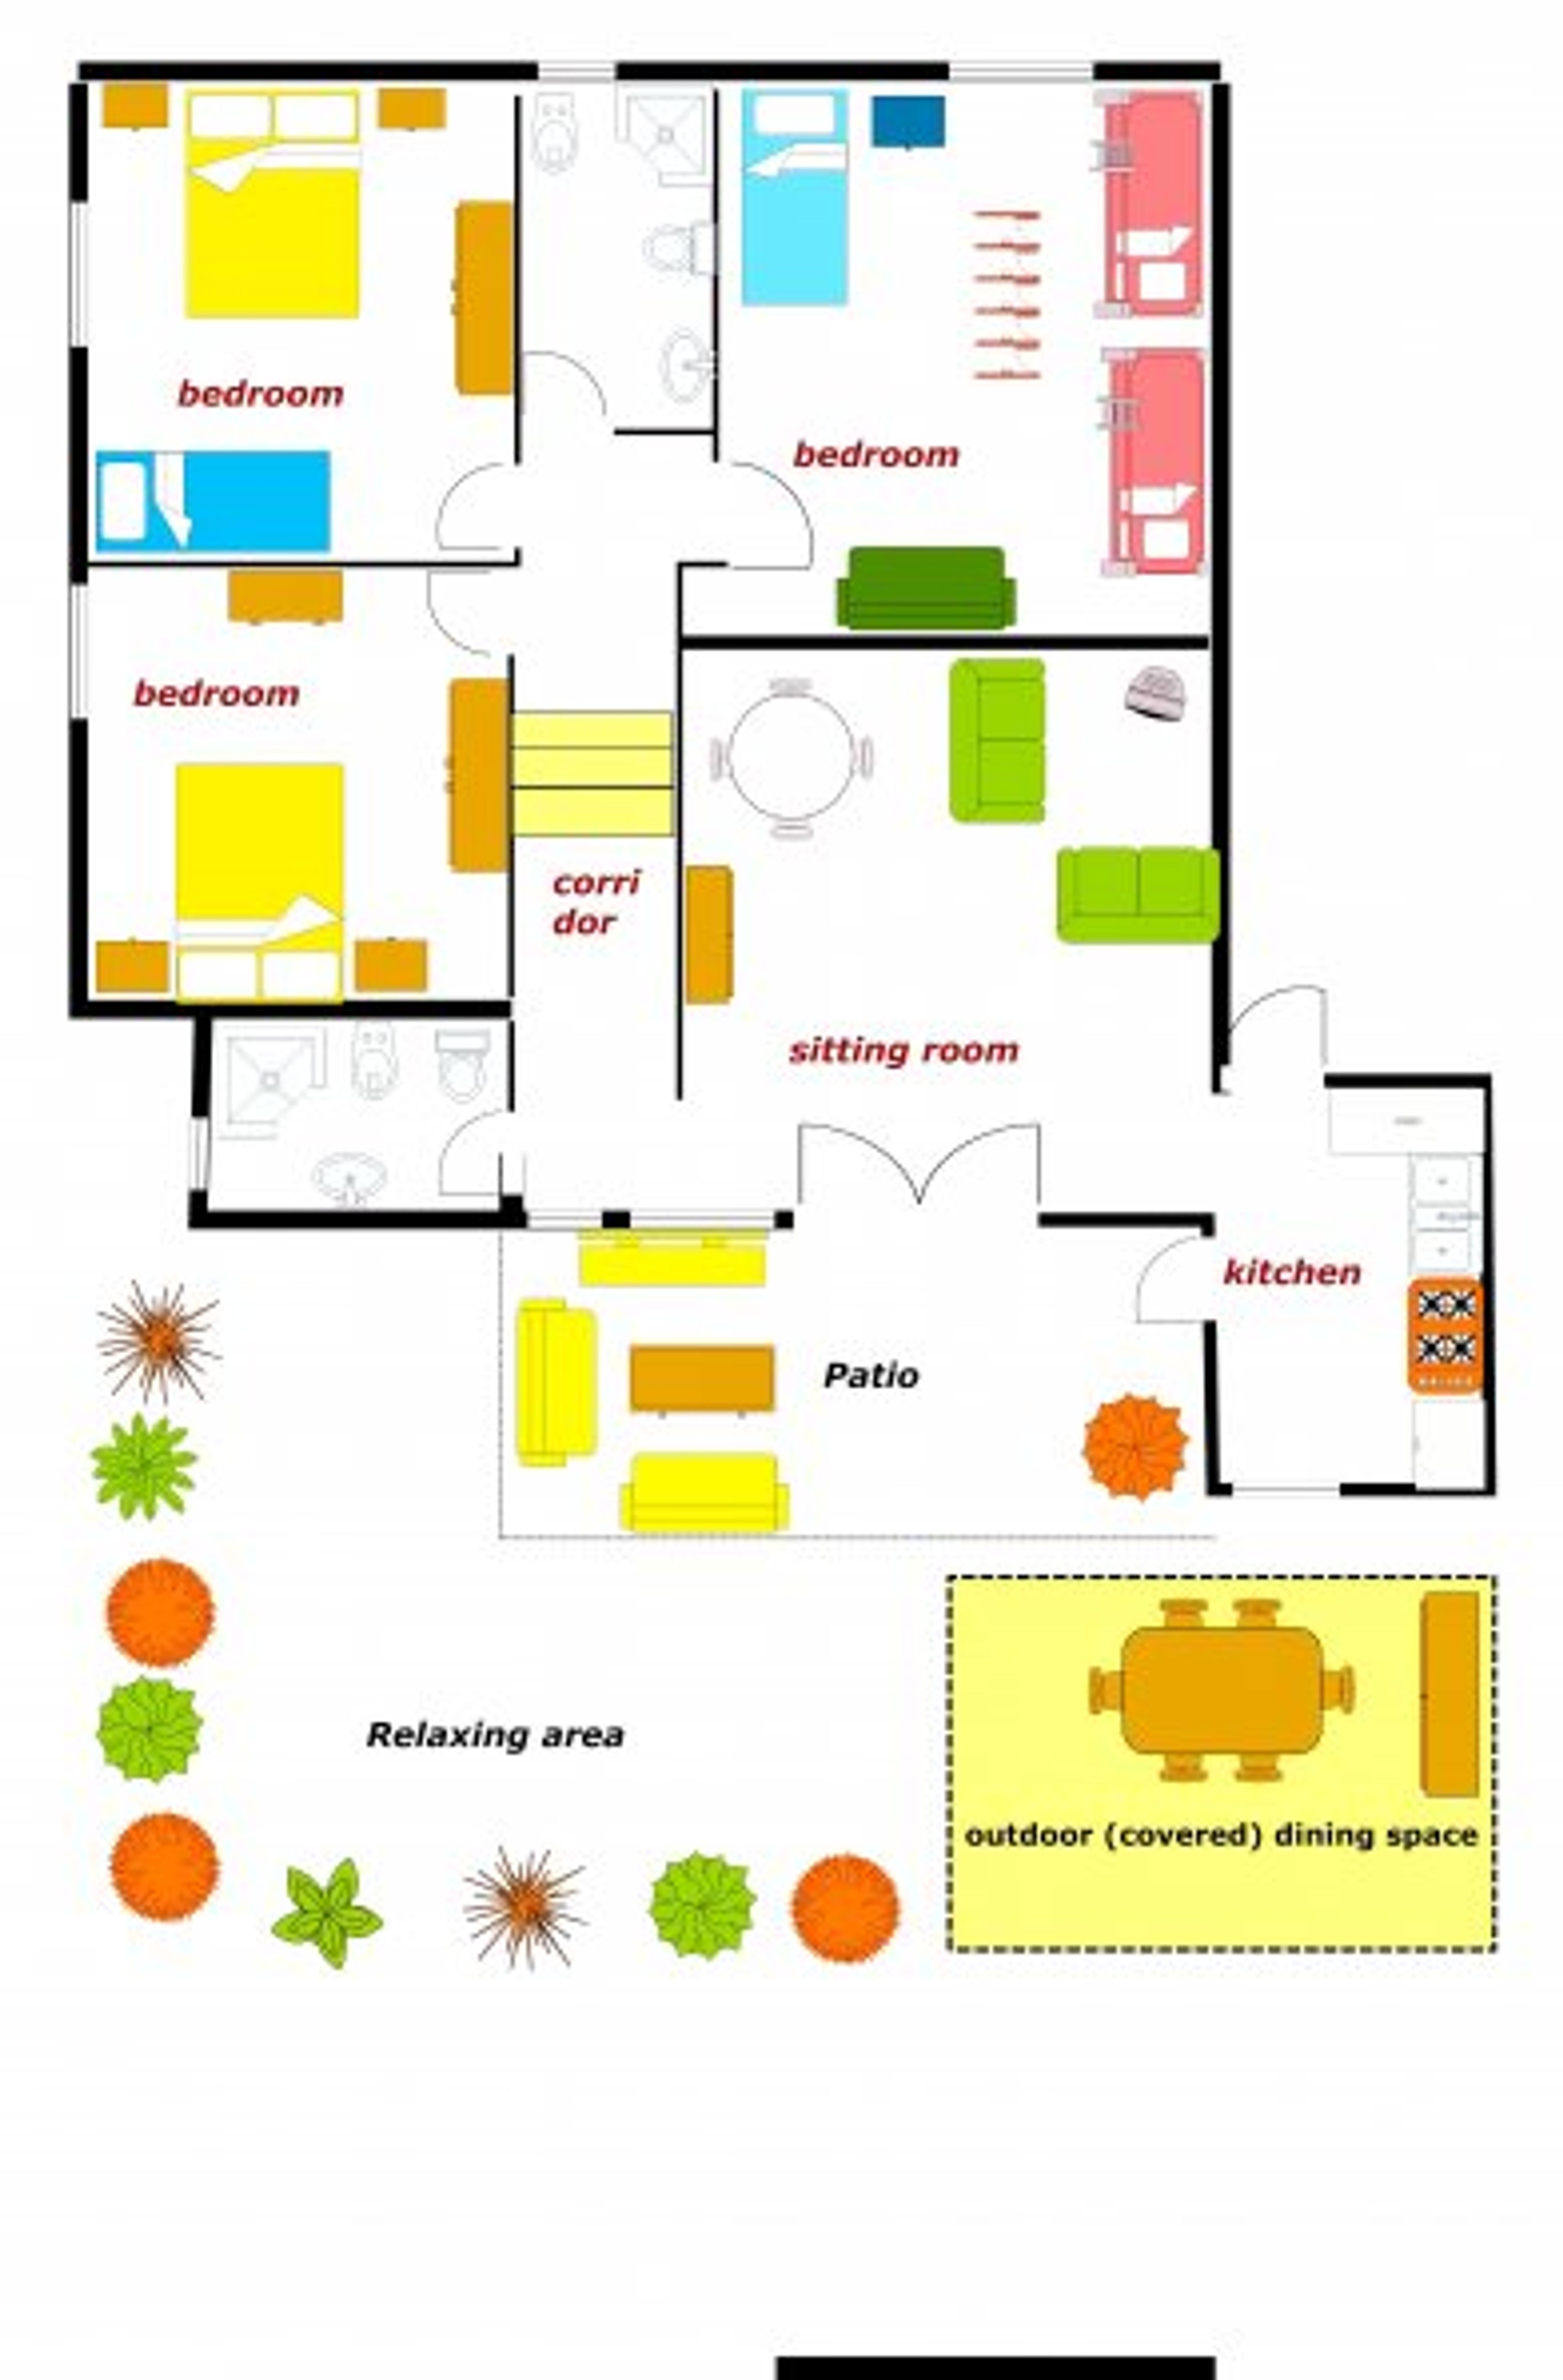 PLAN OF THE APARTMENT